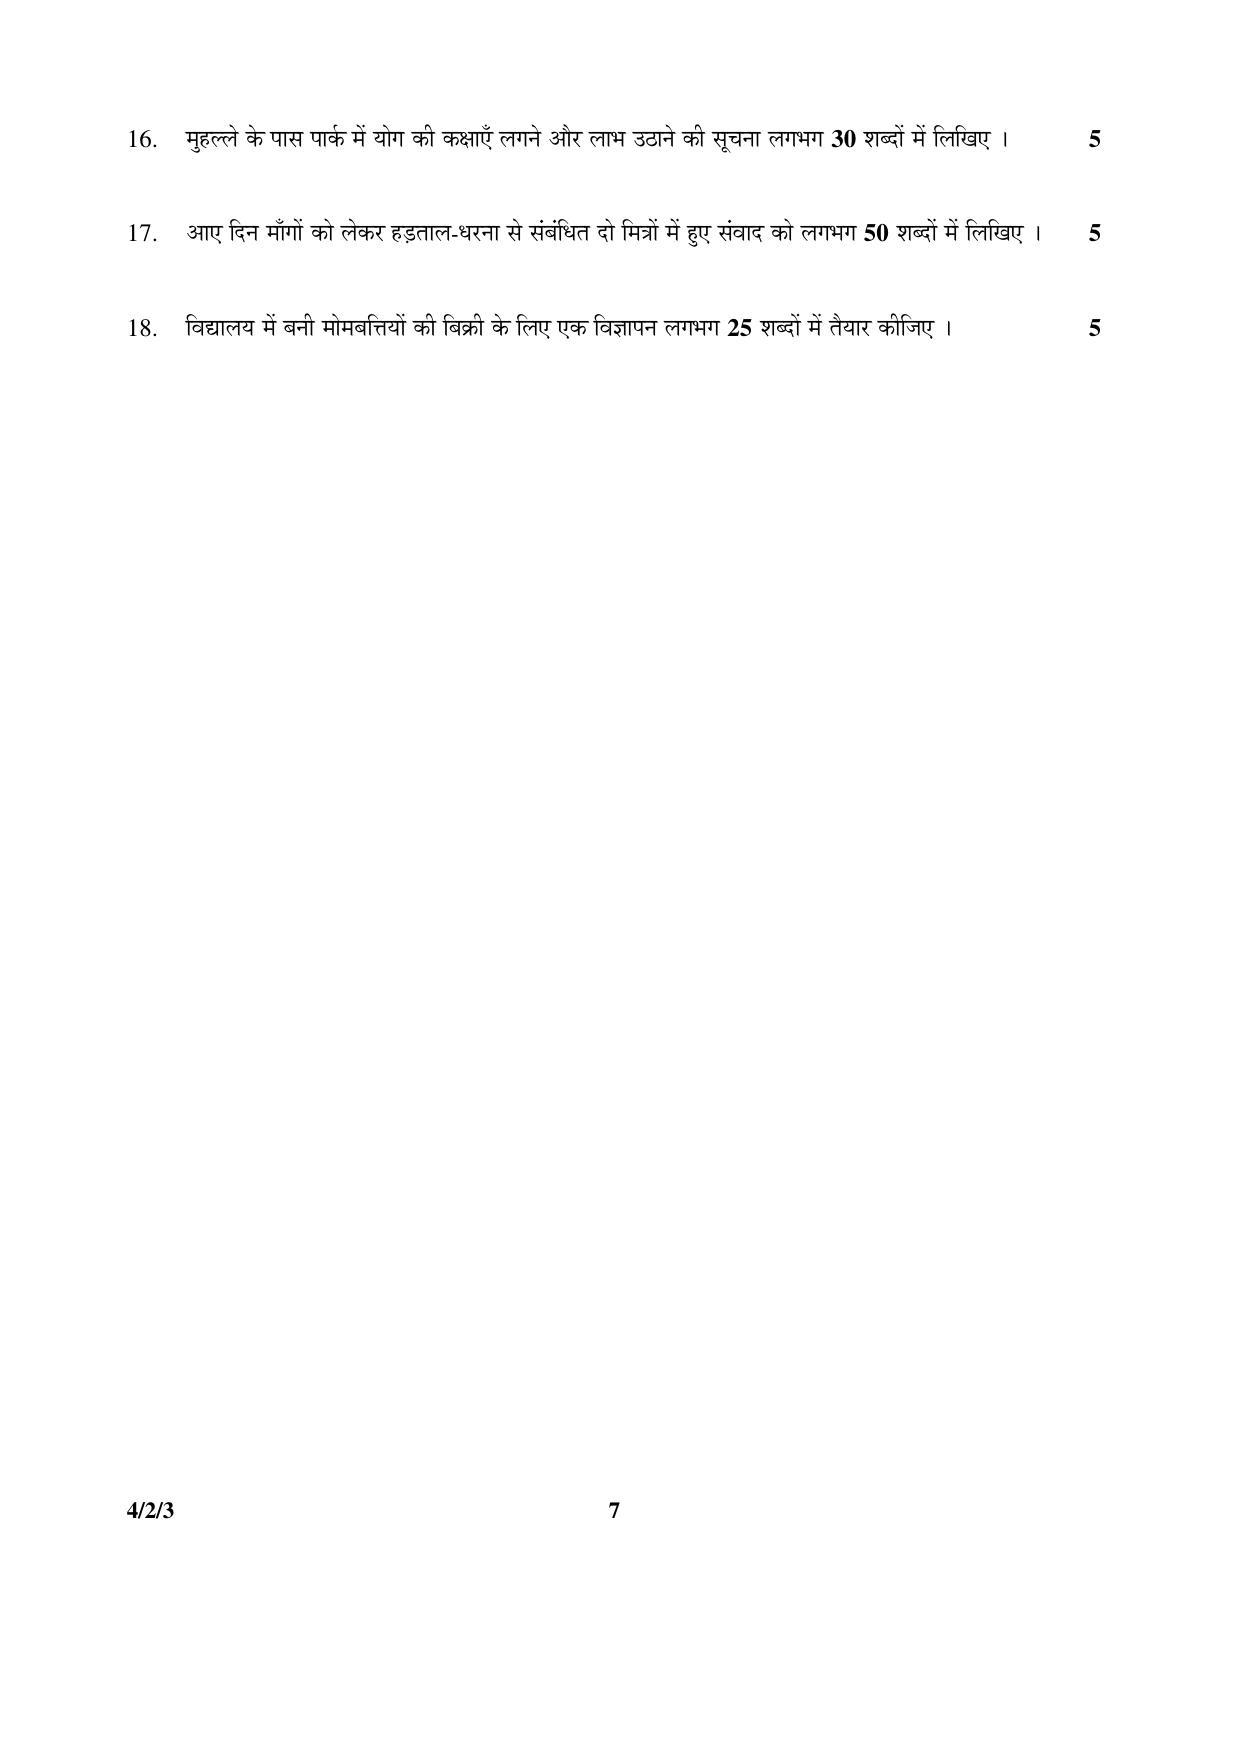 CBSE Class 10 4-2-3  Hindi - B 2016 Question Paper - Page 7